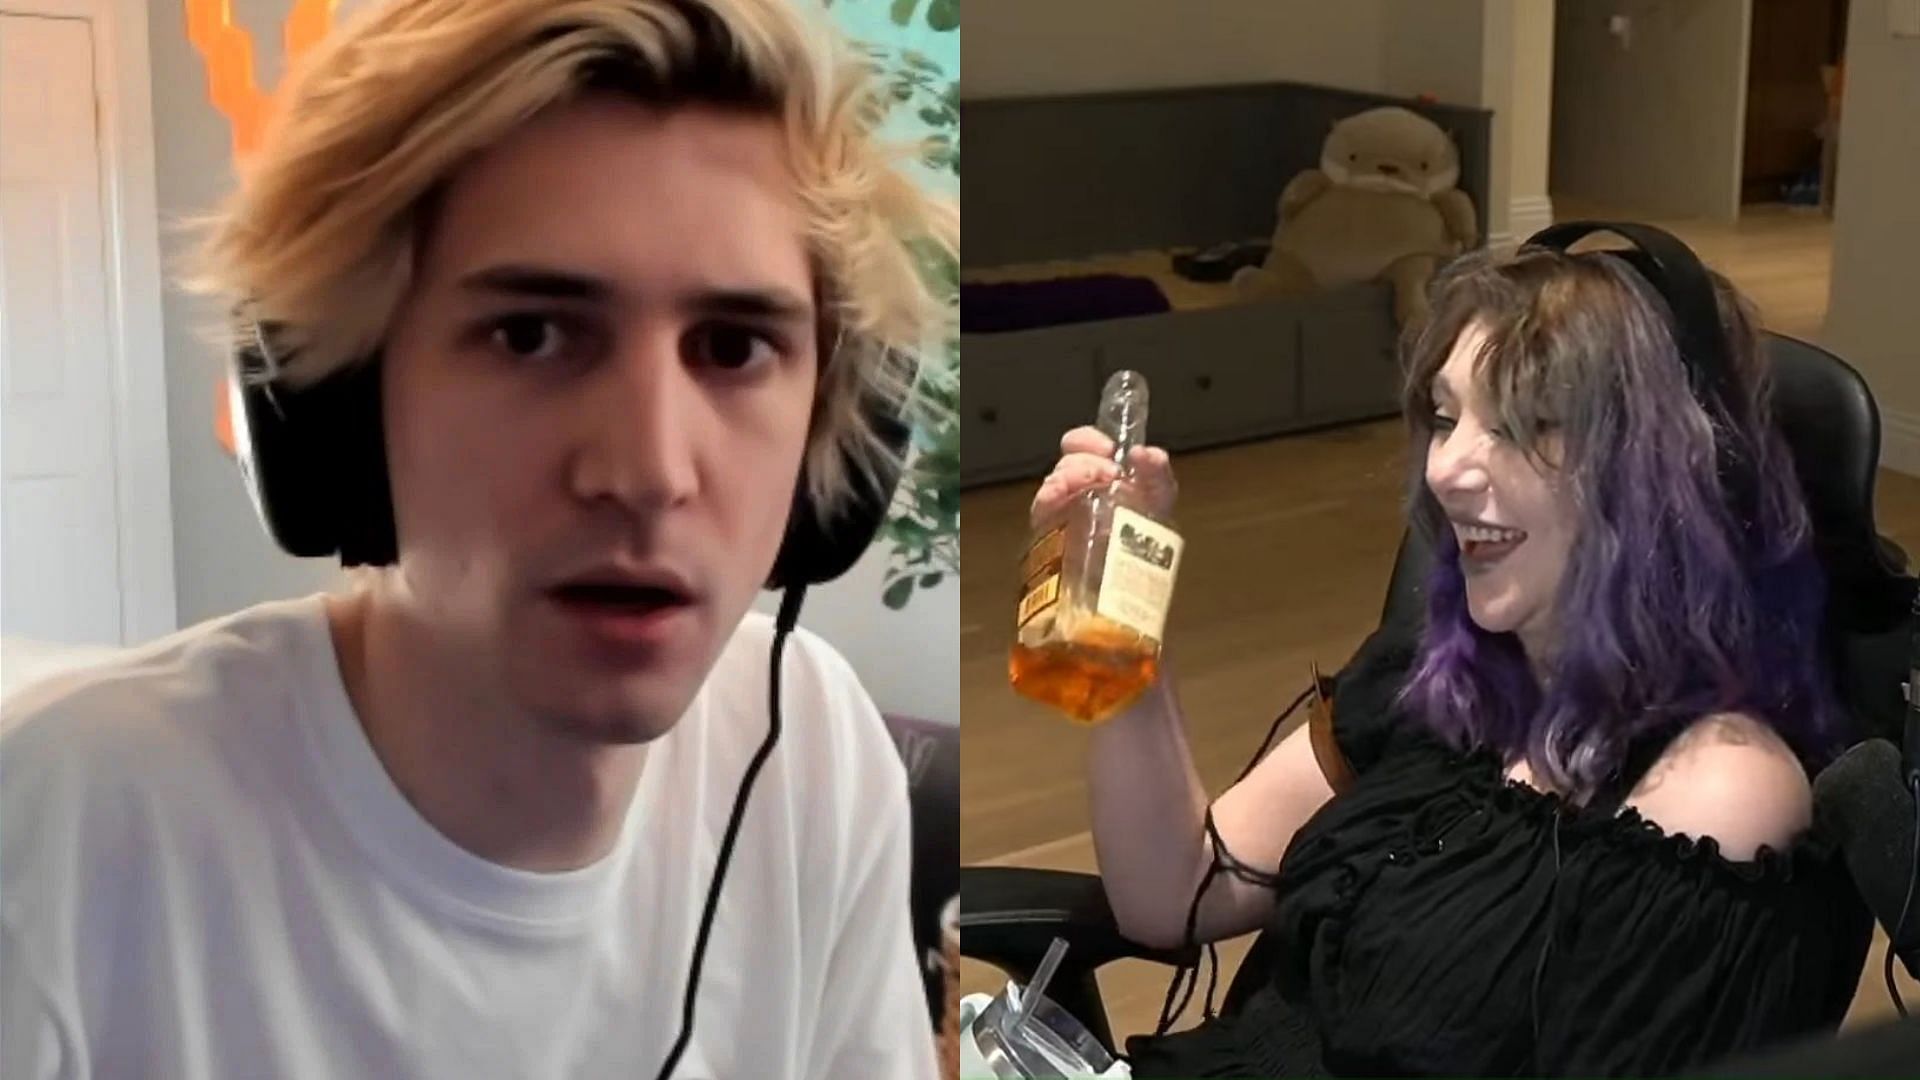 JustaMinx drops her bottle of whiskey after drinking too much : r